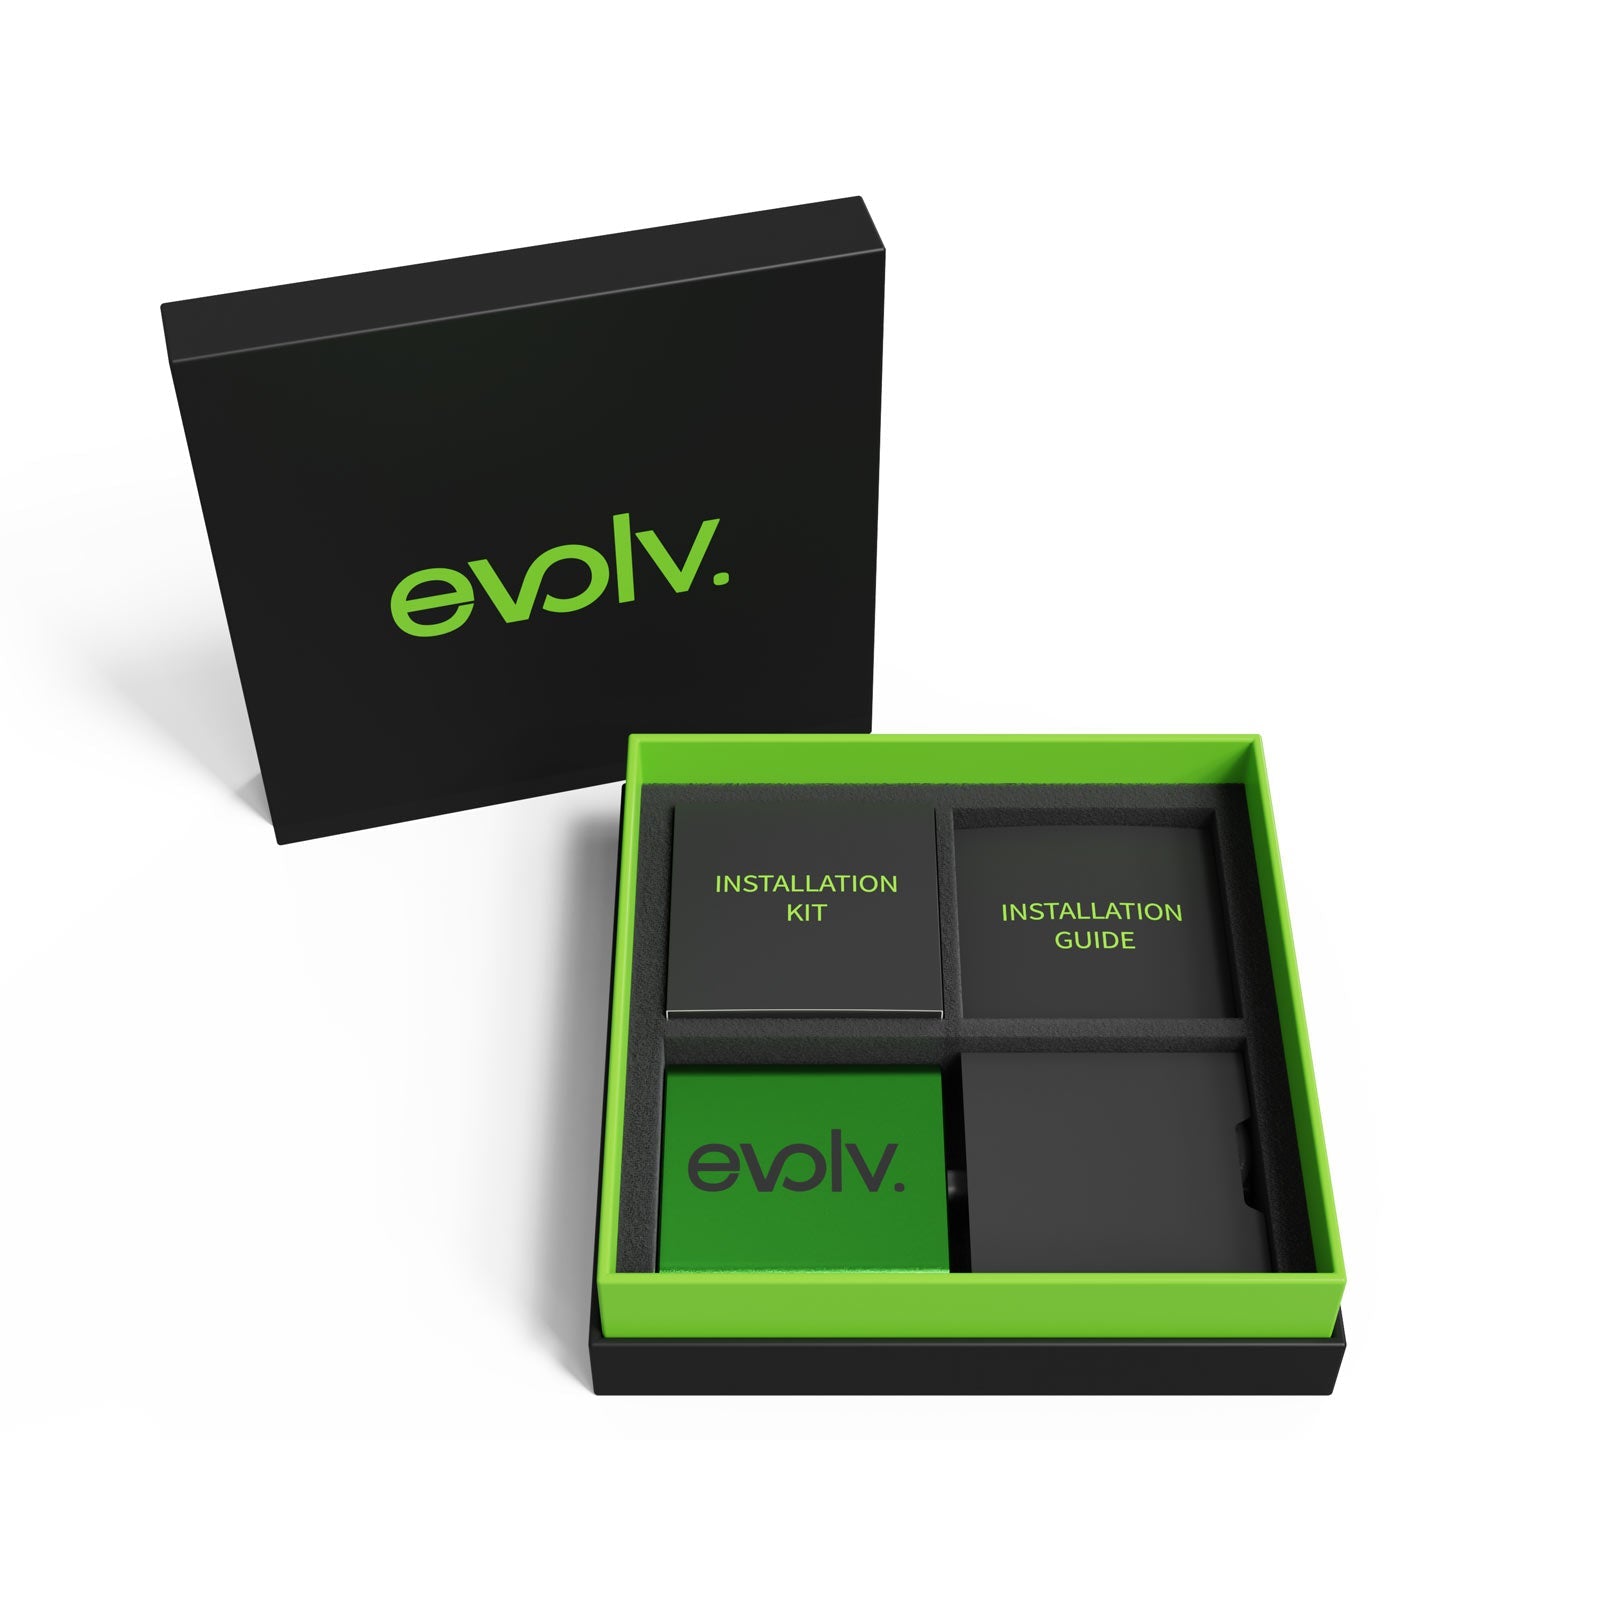 Increase your fuel mileage, performance and throttle response with an Evolv Hummer H1 Performance Chip!